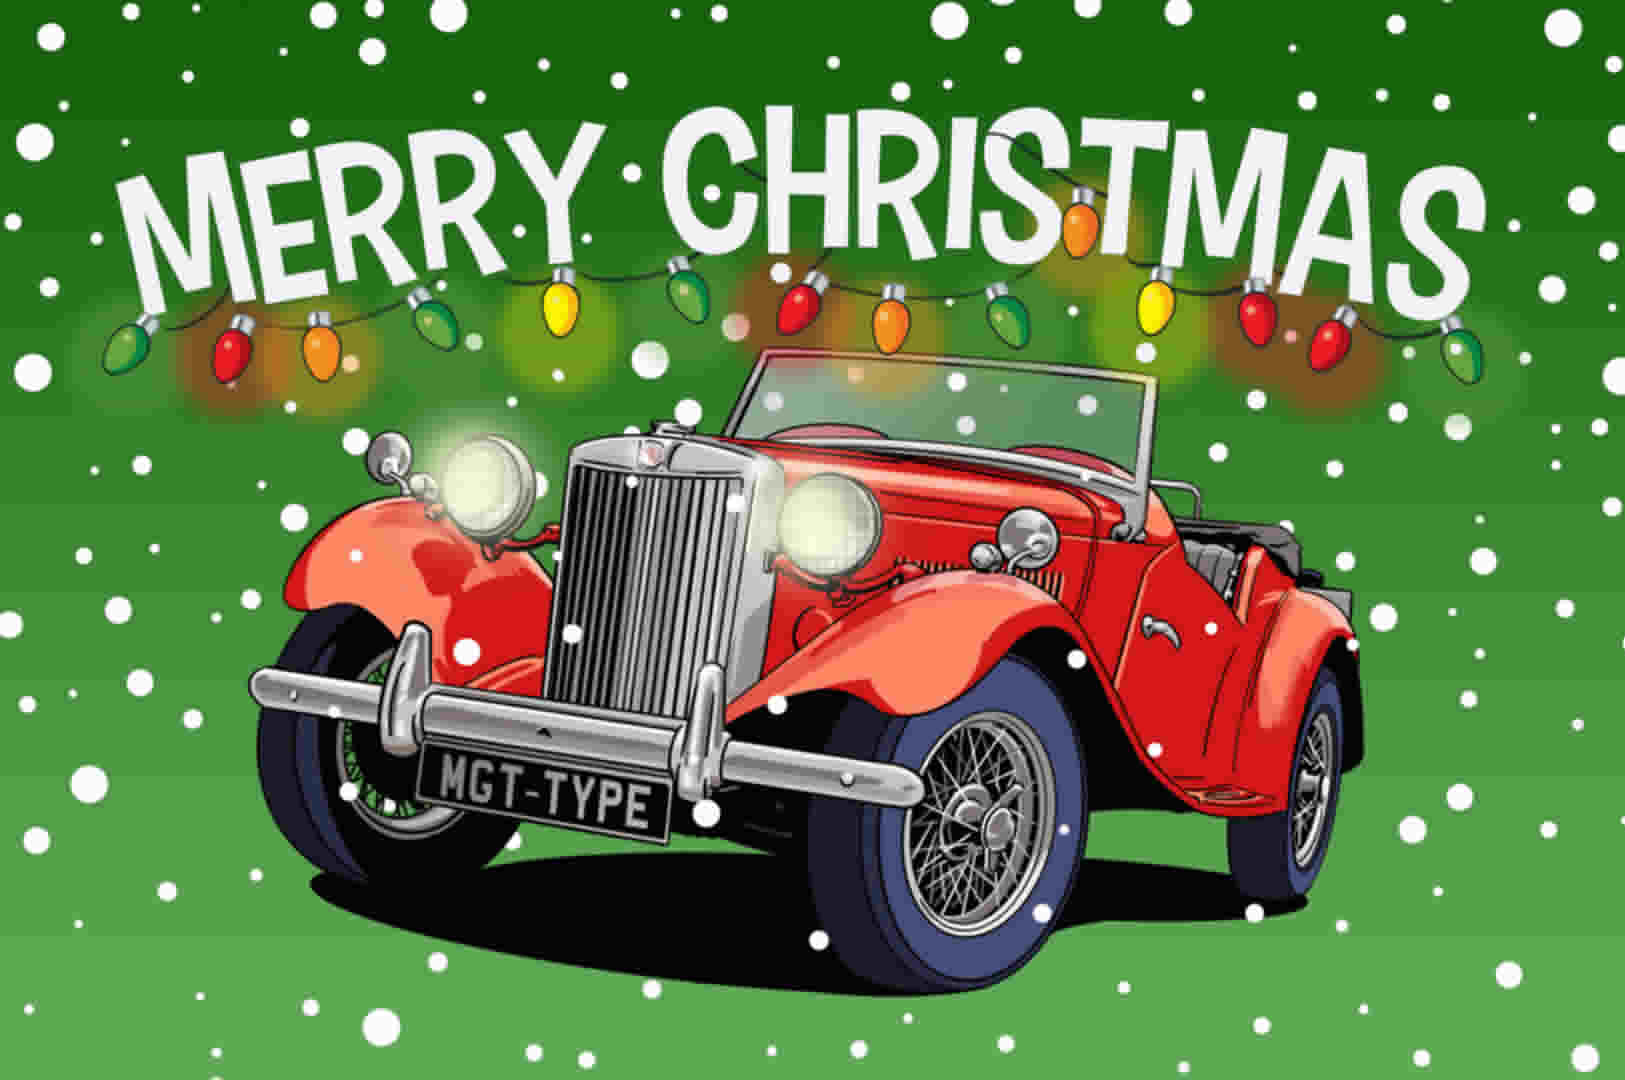 Red MG T-type vintage car Christmas Card